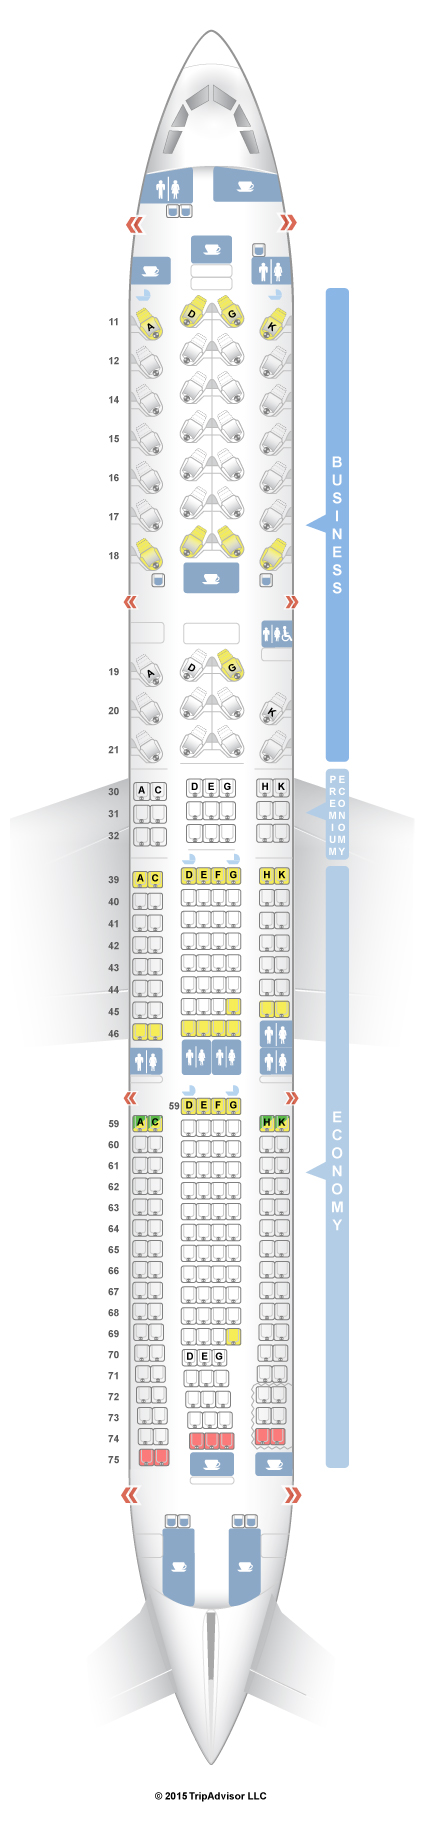 Cathay Pacific Seating Chart